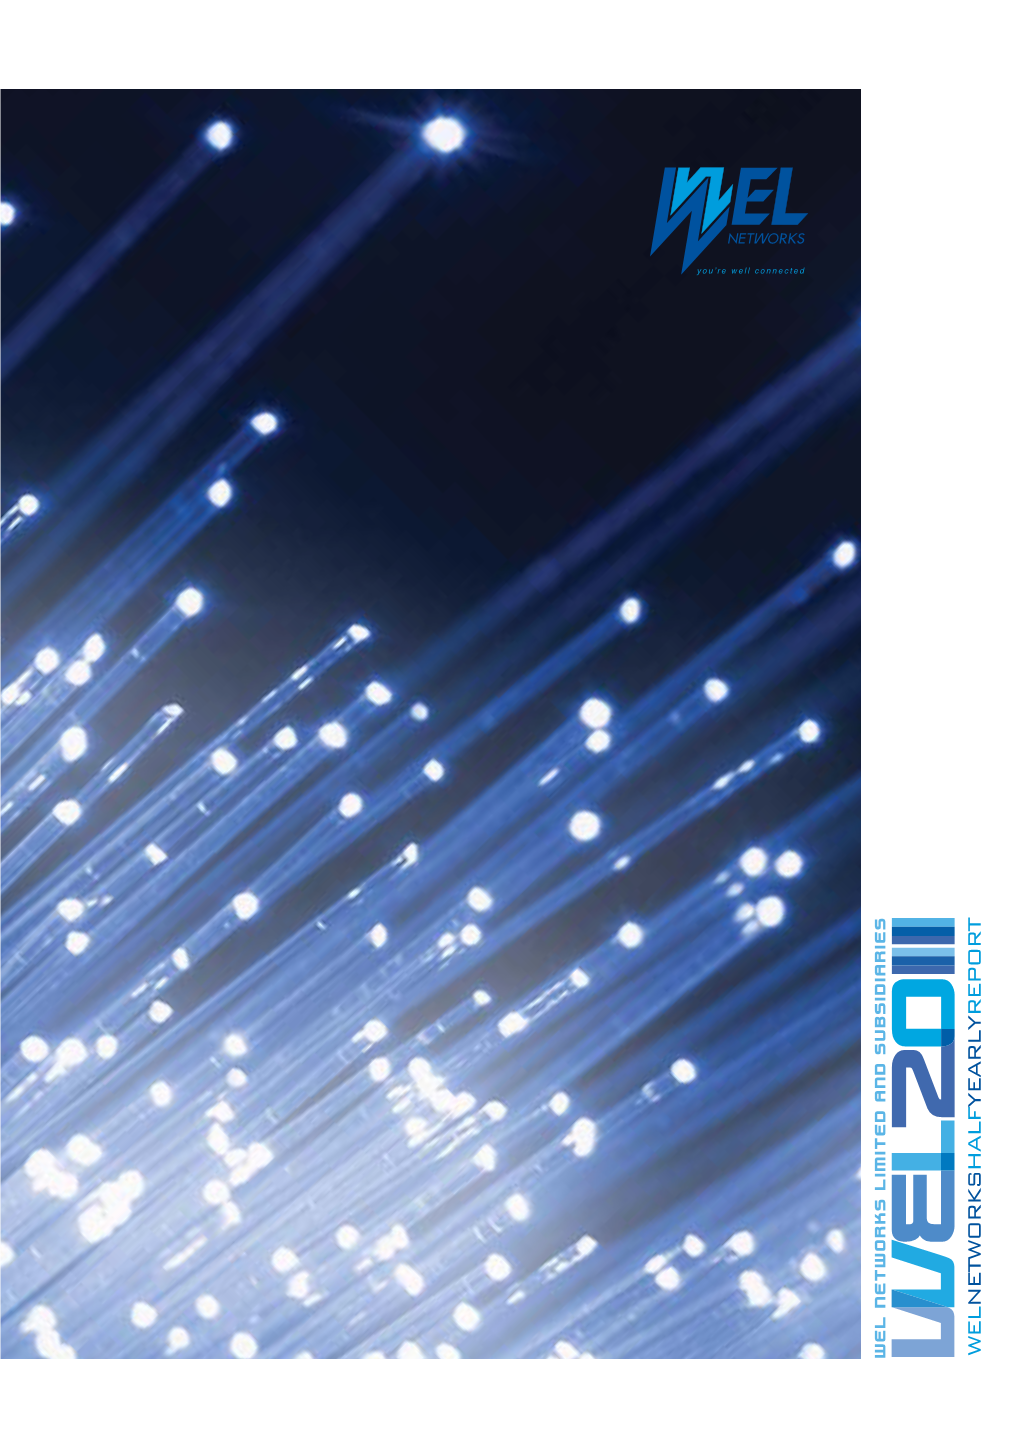 WEL Networks Half Yearly Report 2011